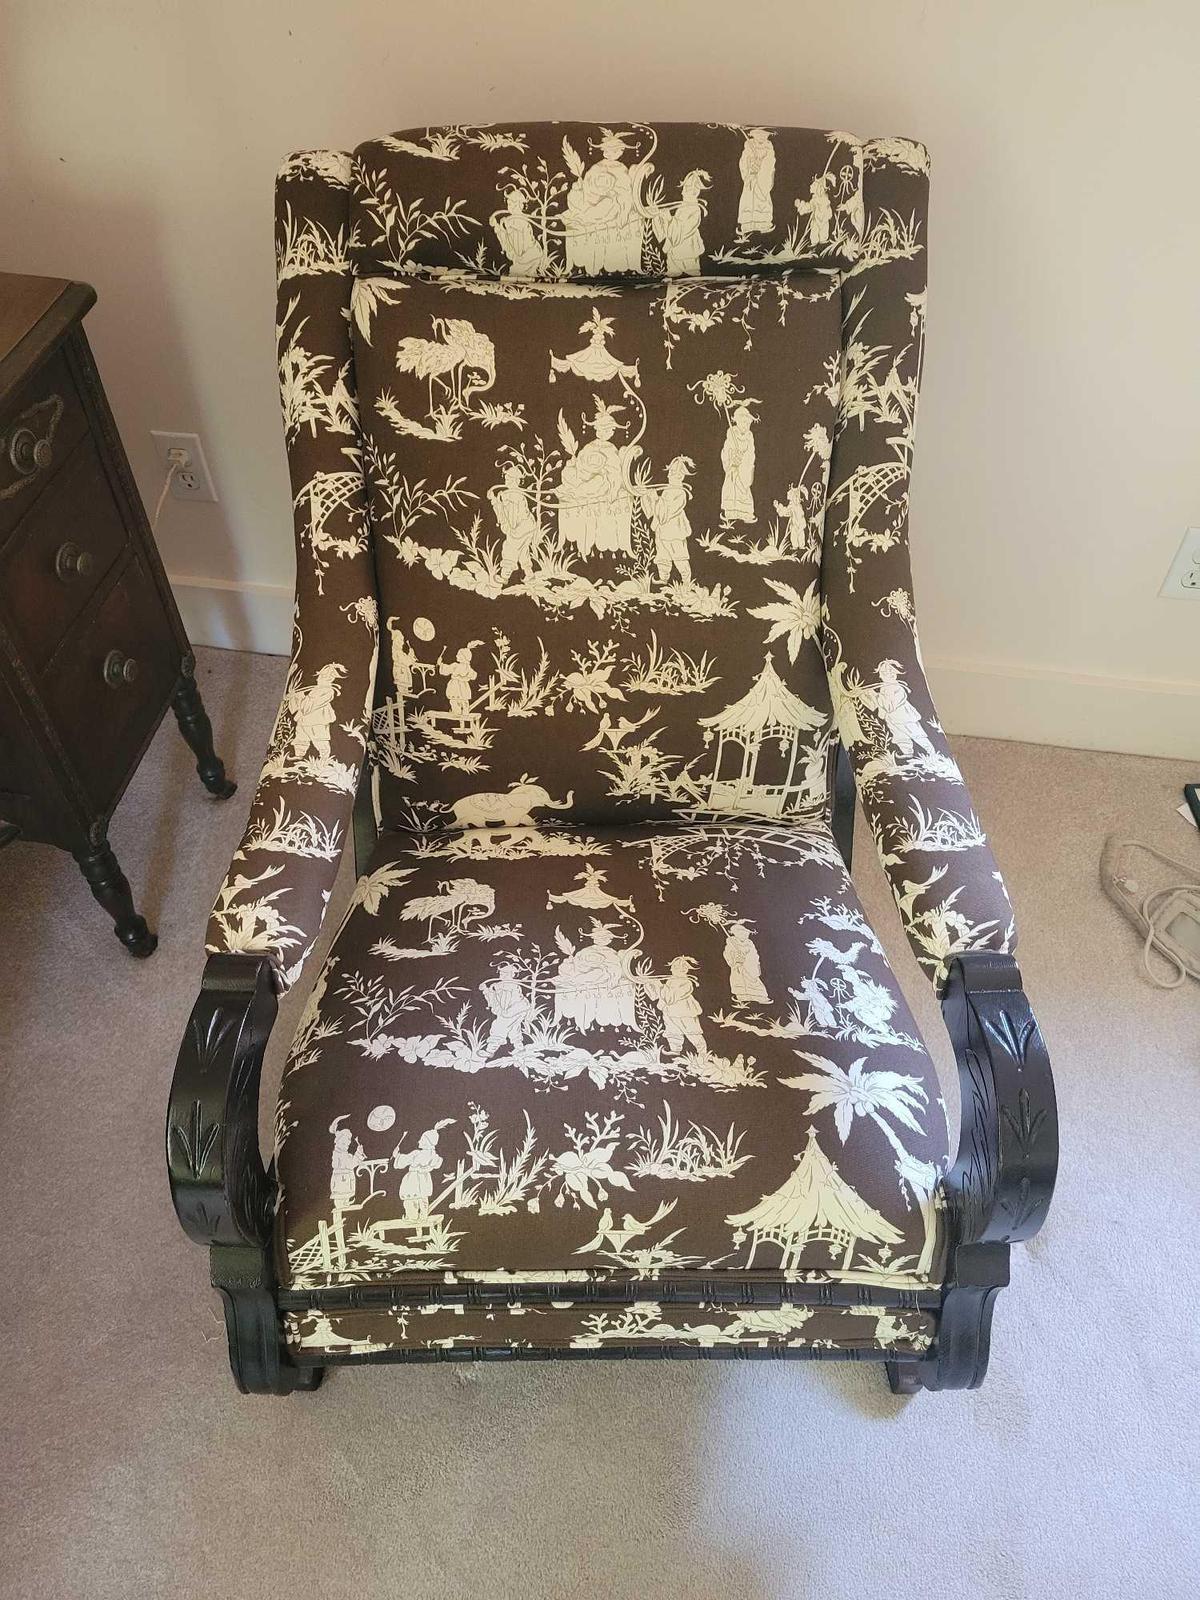 Vintage Japanese Rocking Chair $20 STS